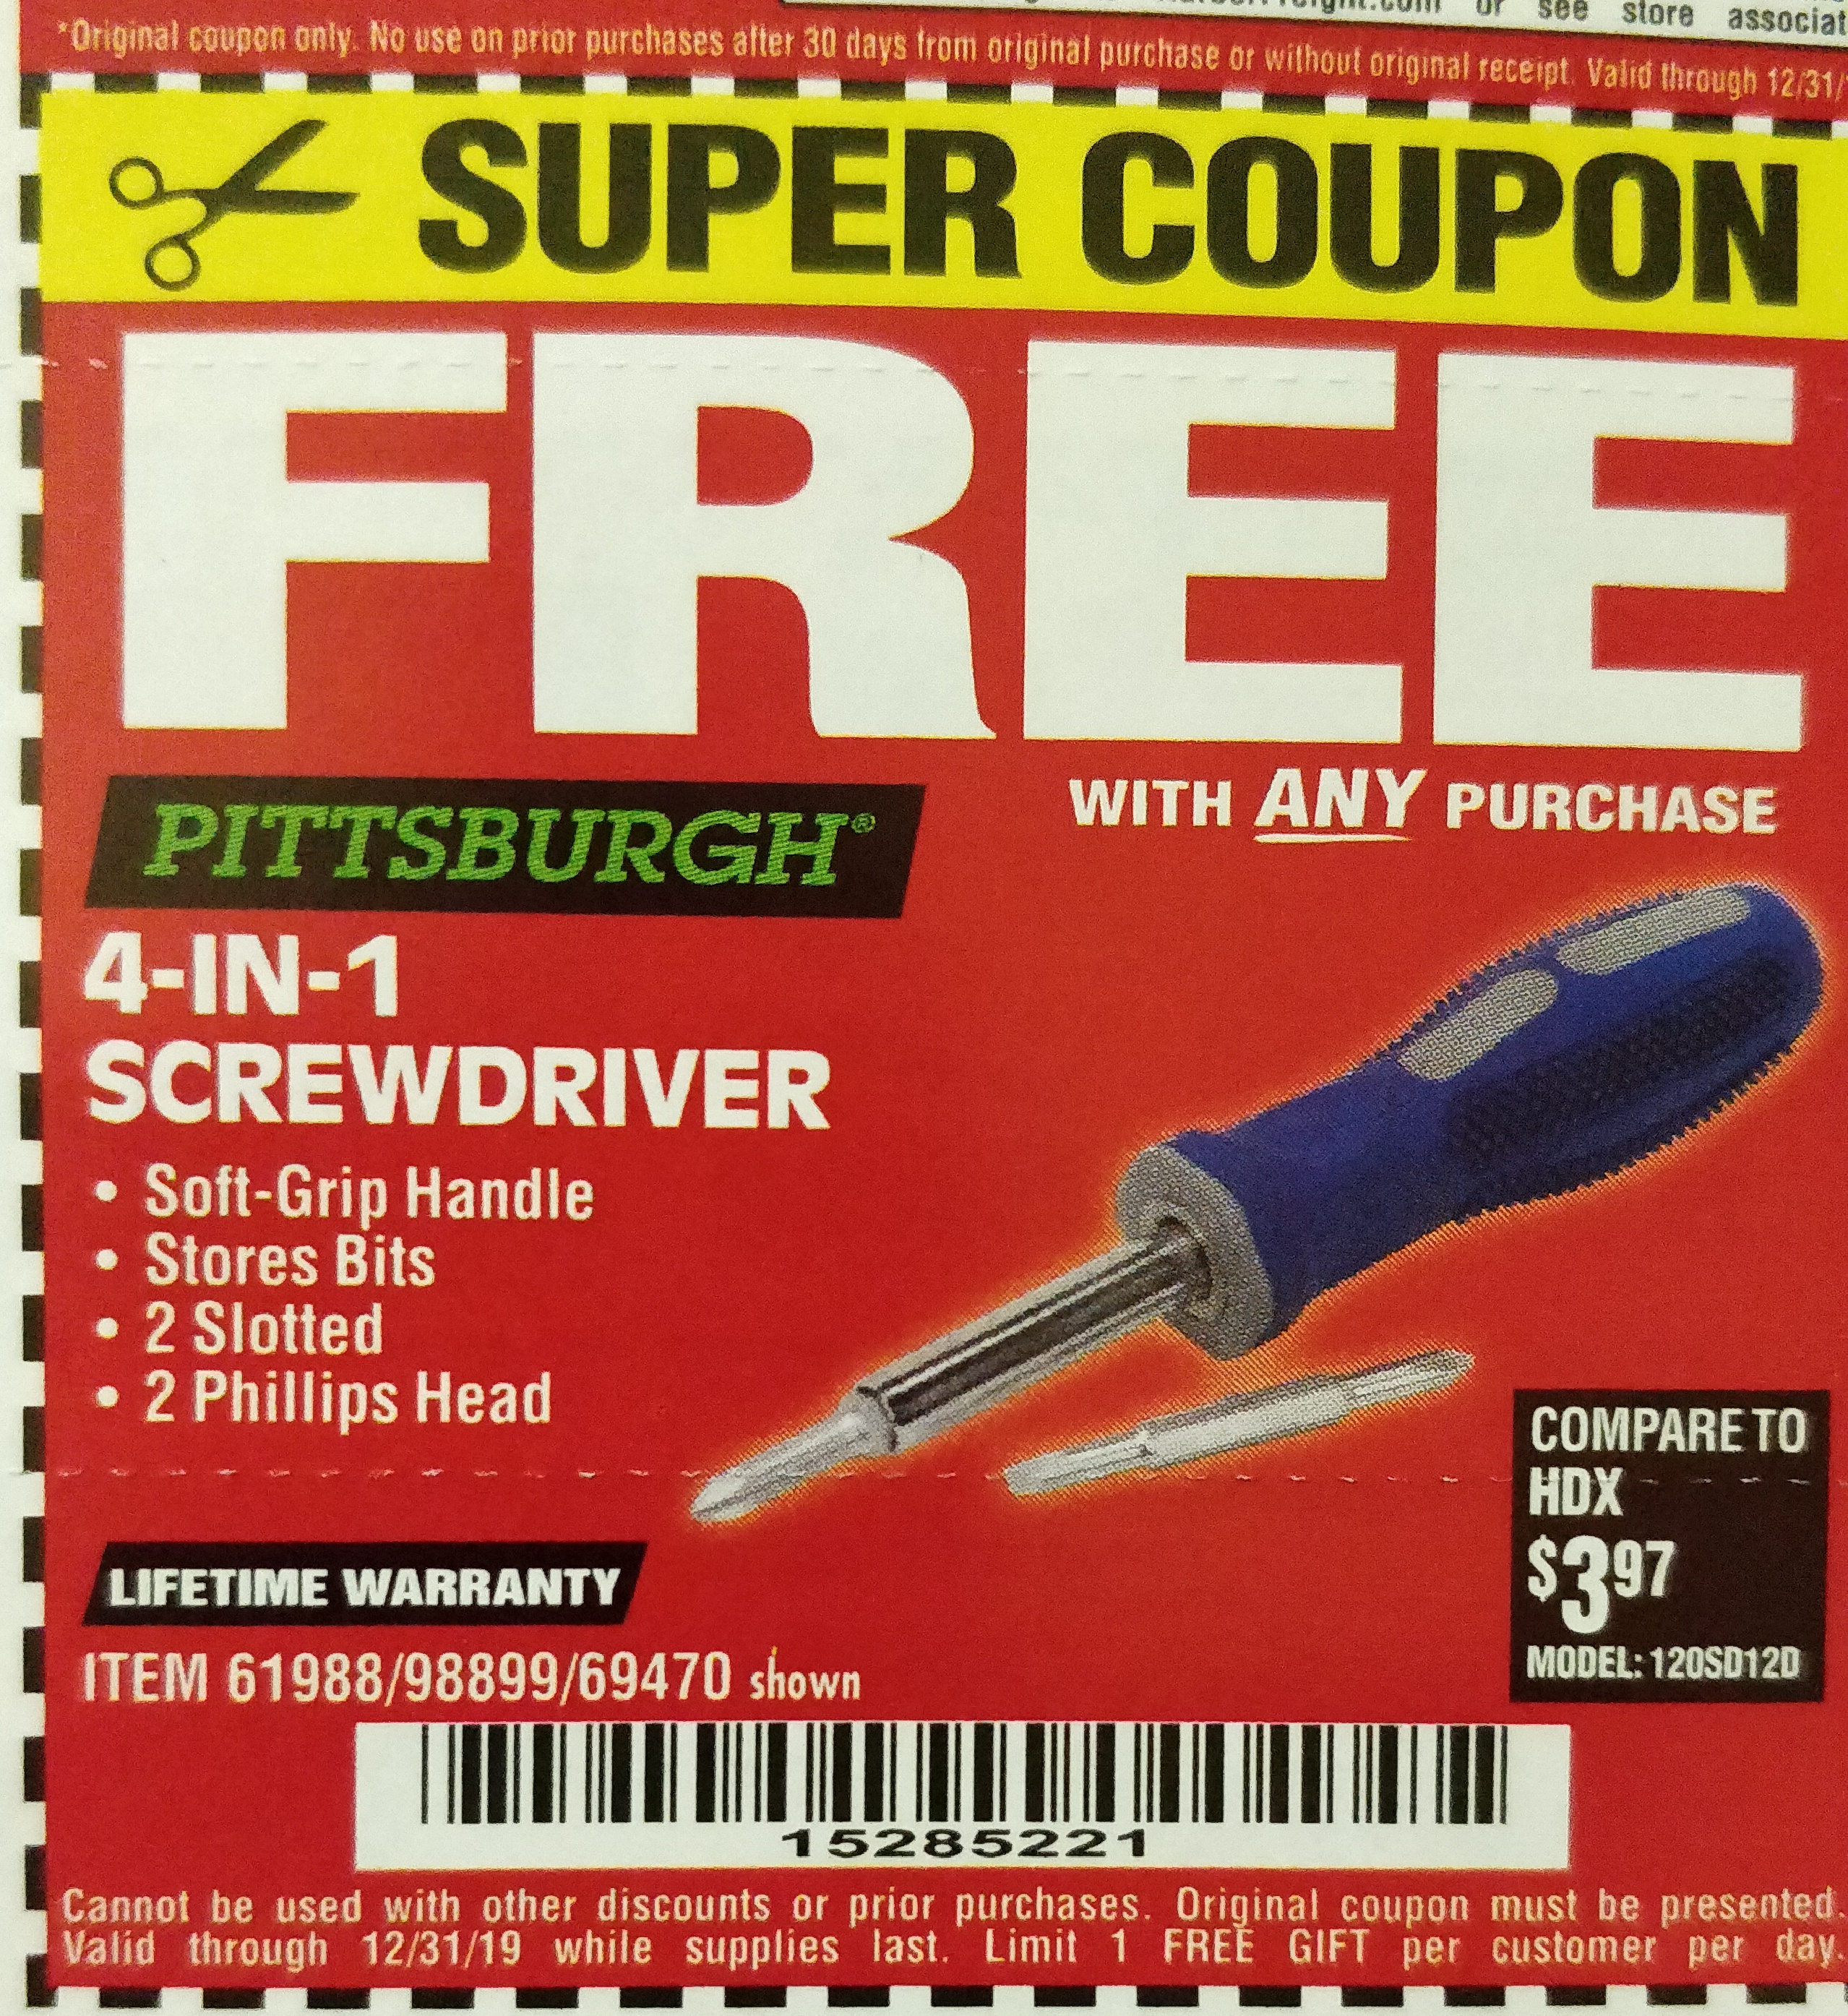 harbor freight advance timing light coupon